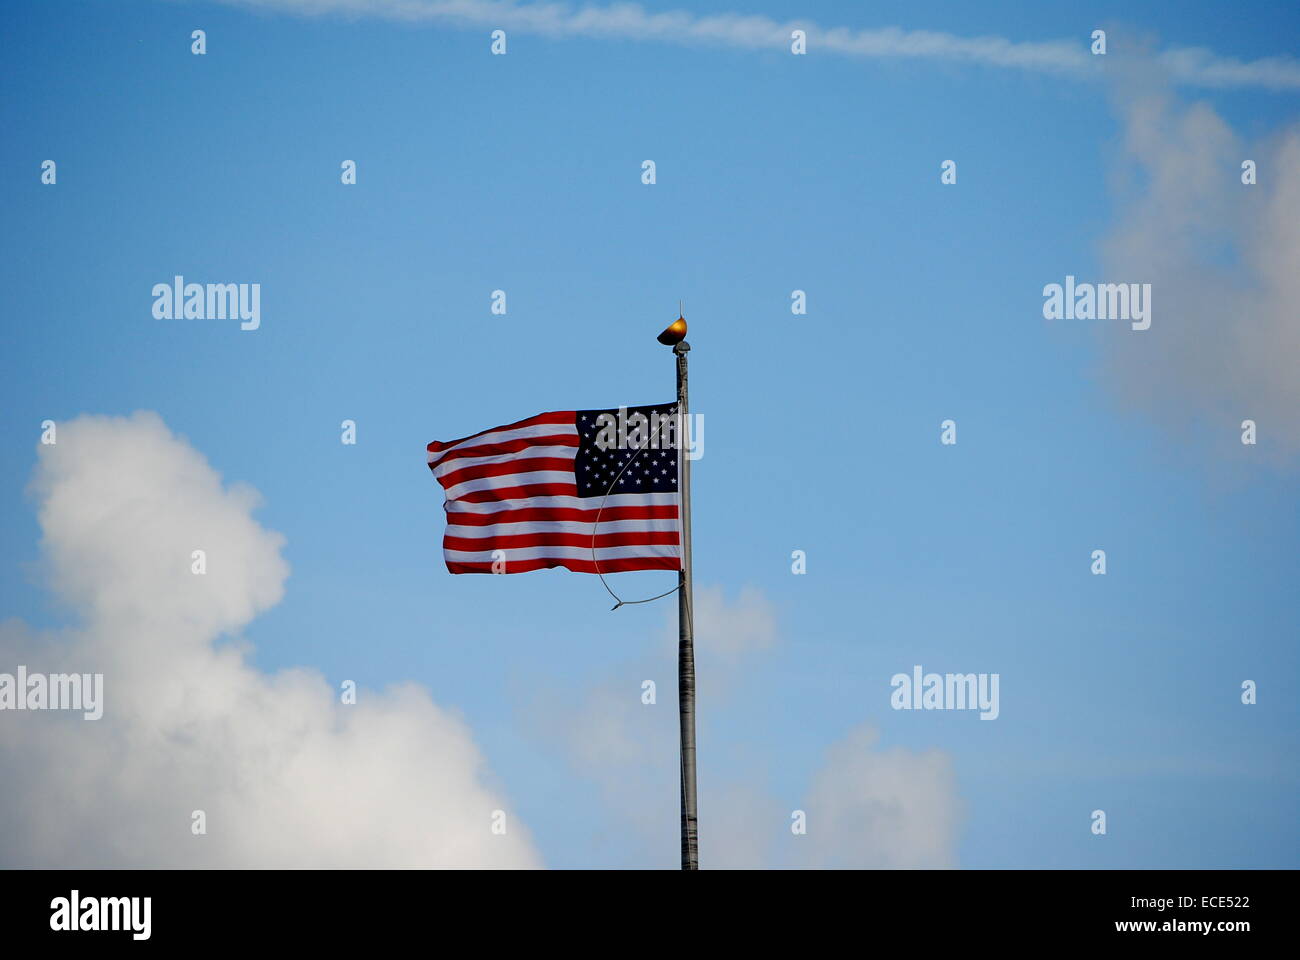 The American Flag,flying gracefully,against a partly cloudy sky. Stock Photo